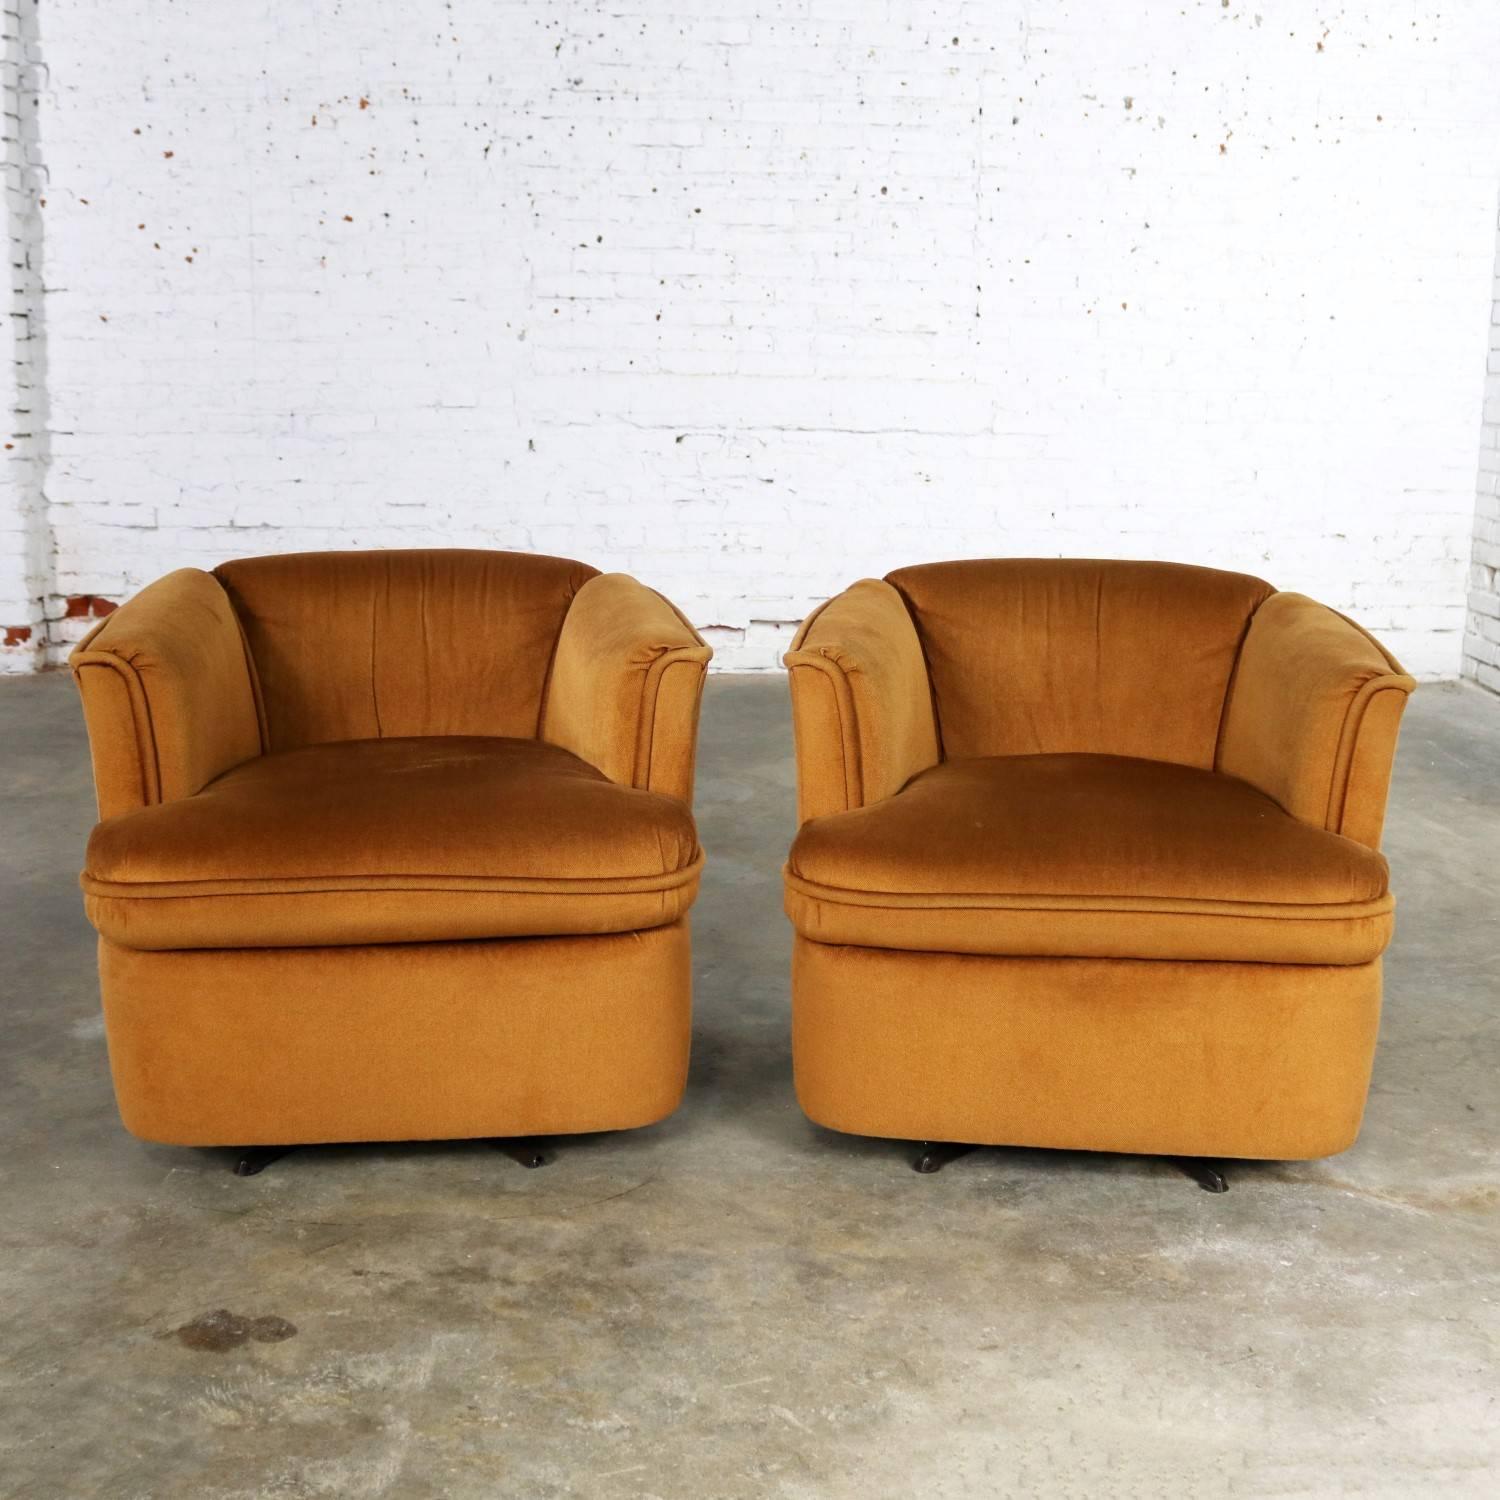 Handsome pair of Drexel barrel shaped swivel club chairs in their original burnt orange velvet upholstery. They are in wonderful vintage condition with normal wear. See photos, circa 1960s.

Perfect petit little pair of swivel barrel chairs!